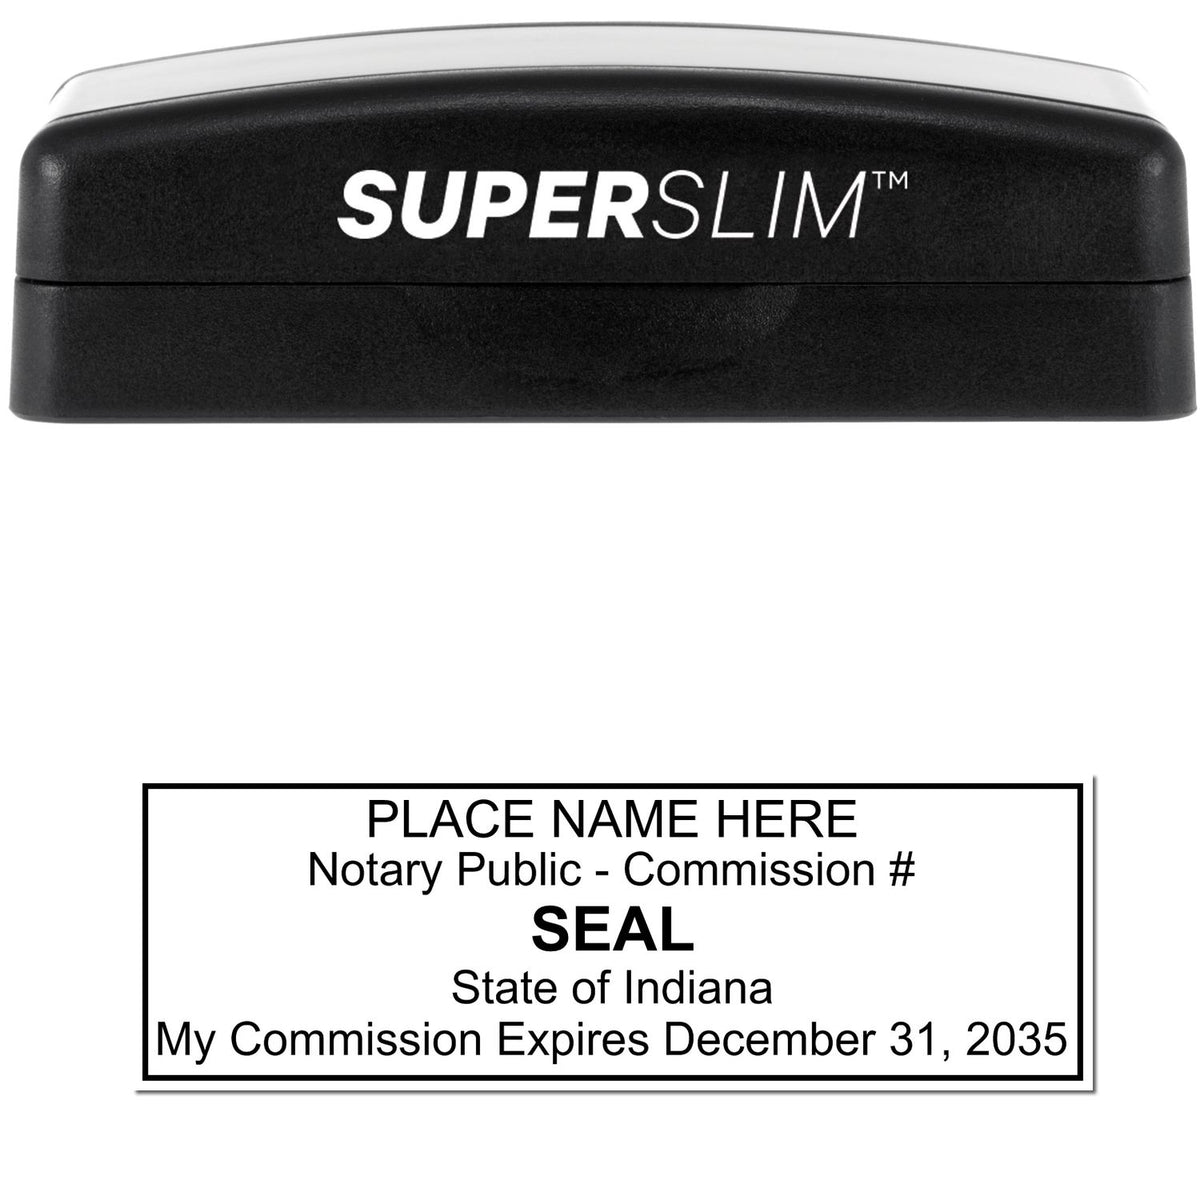 The main image for the Super Slim Indiana Notary Public Stamp depicting a sample of the imprint and electronic files